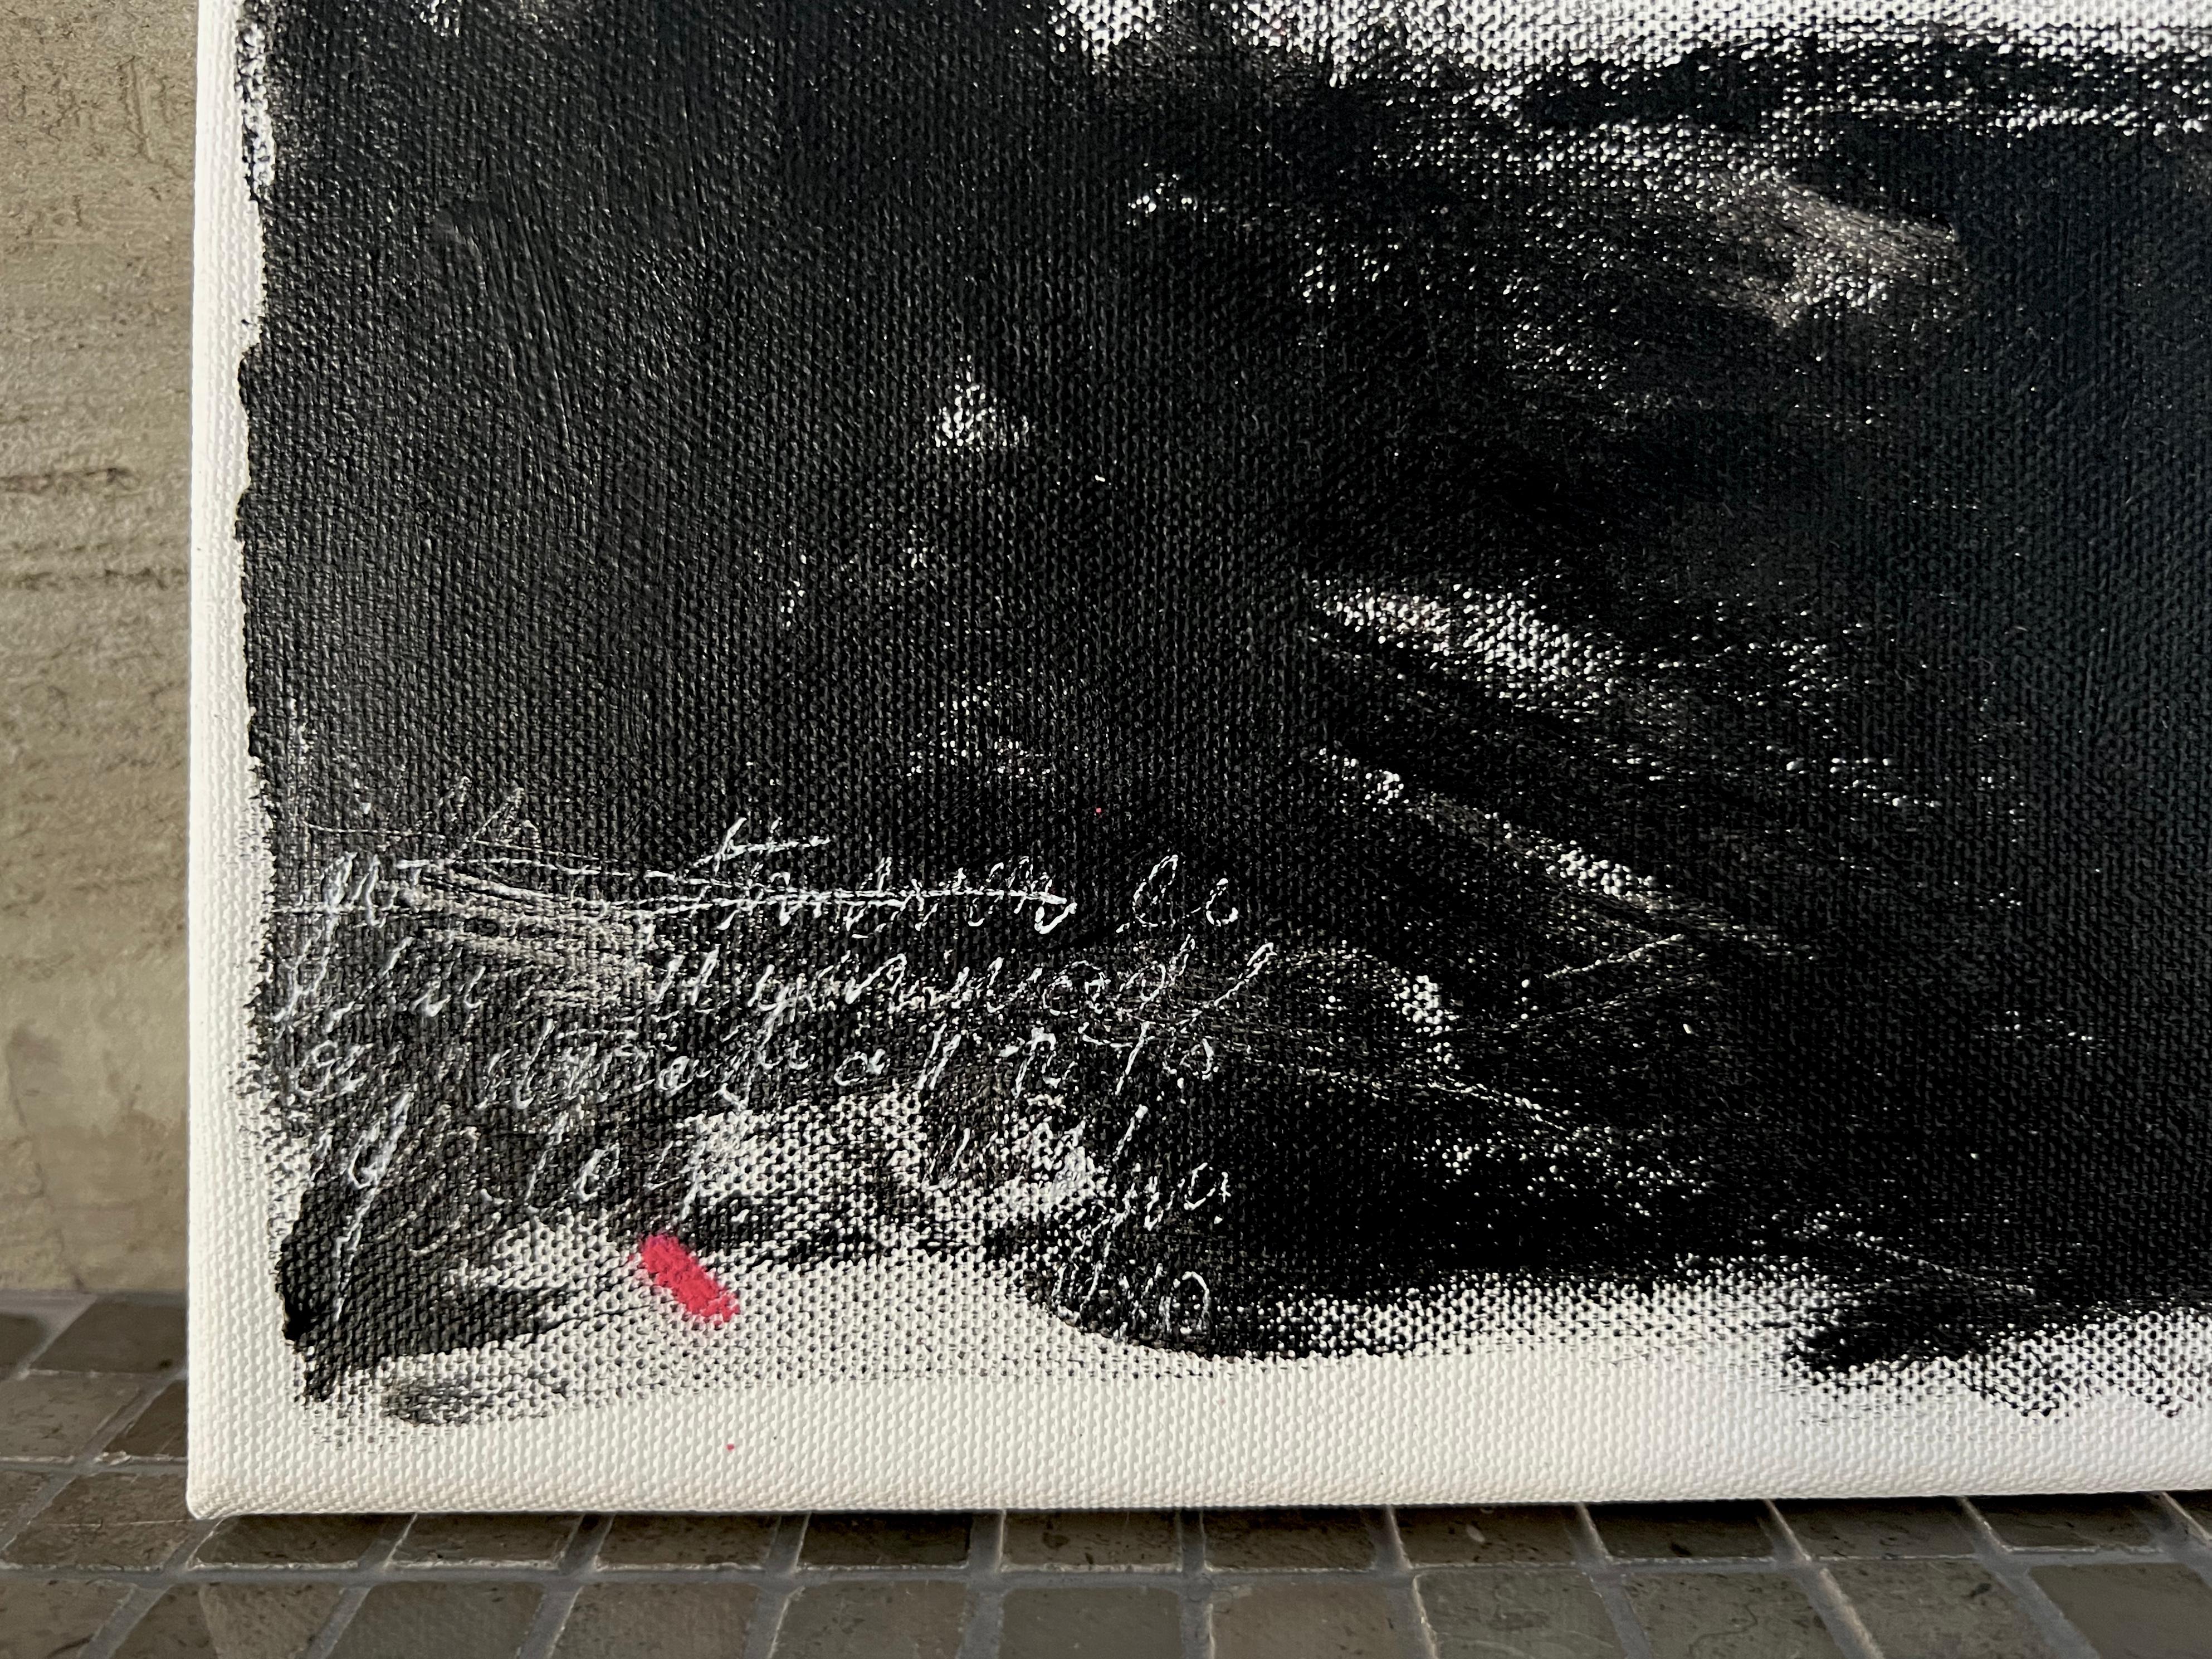 A Note To Myself - 2 (black and white abstract painting) For Sale 3